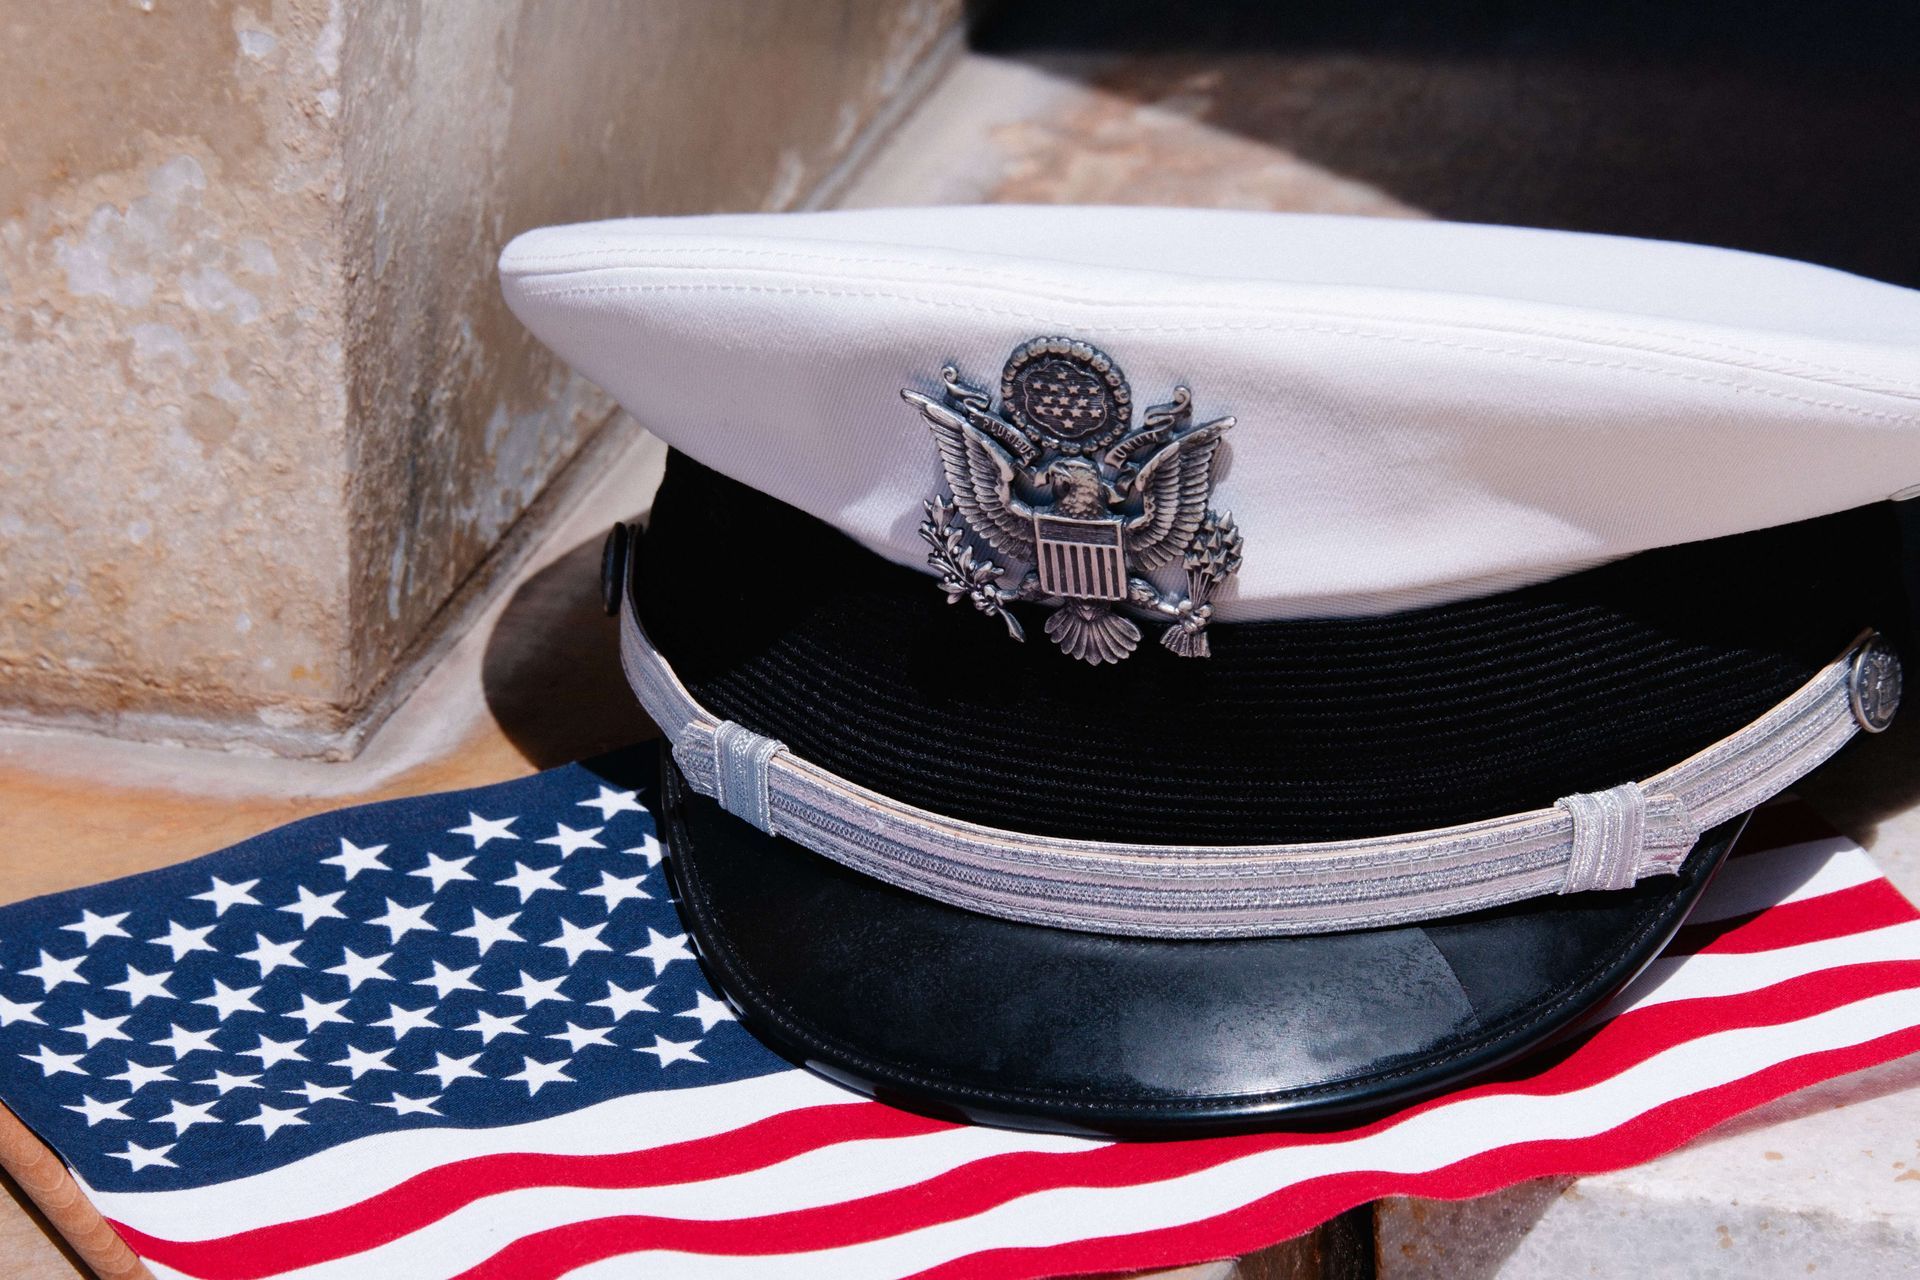 White and Black Military Hat on USA Flag